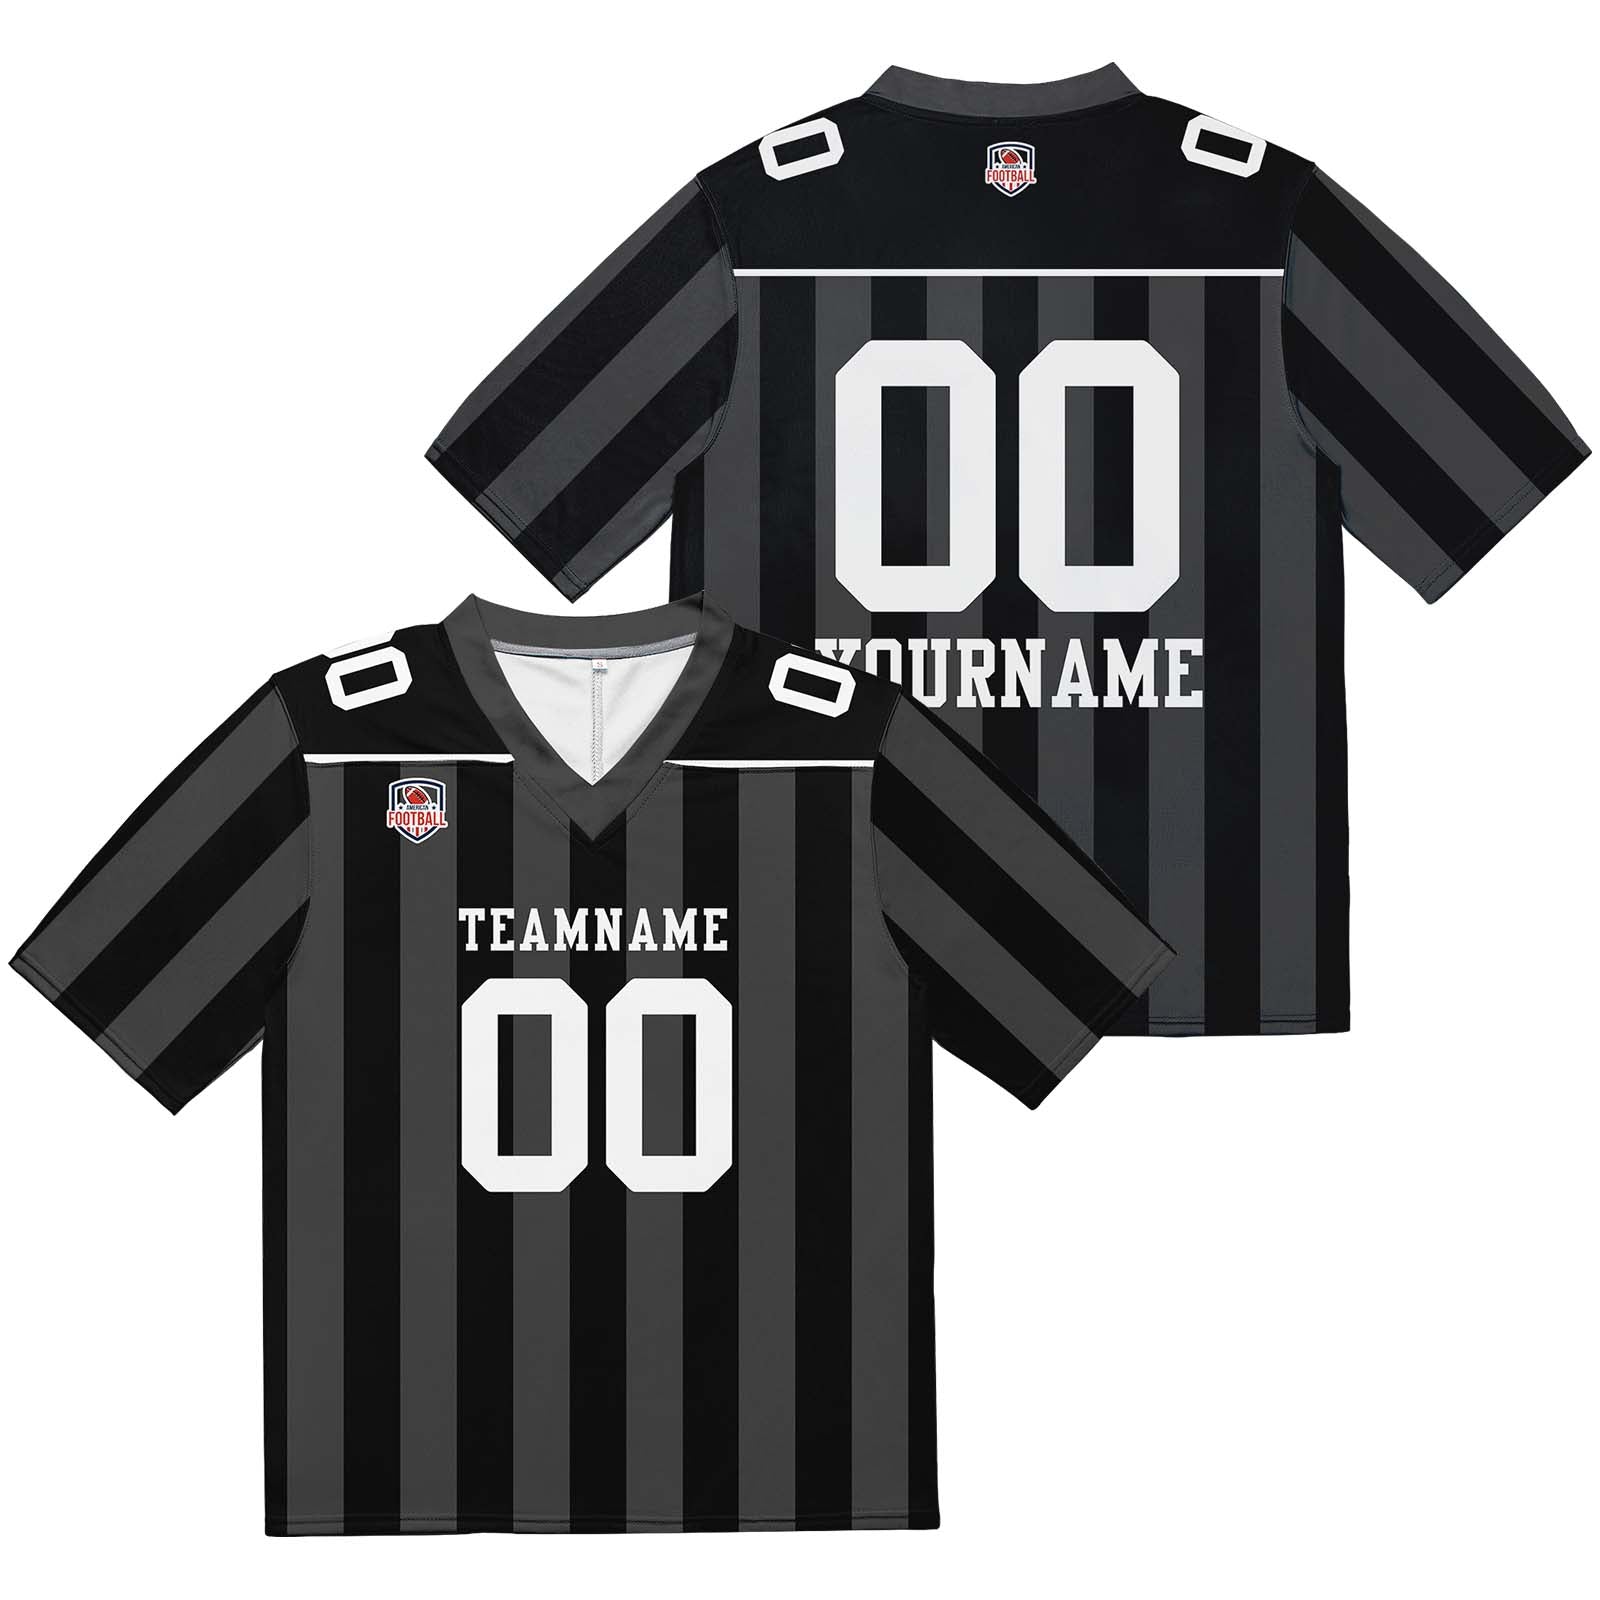 Custom Football Jersey Shirt Personalized Stitched Printed Team Name Number Black & Grey